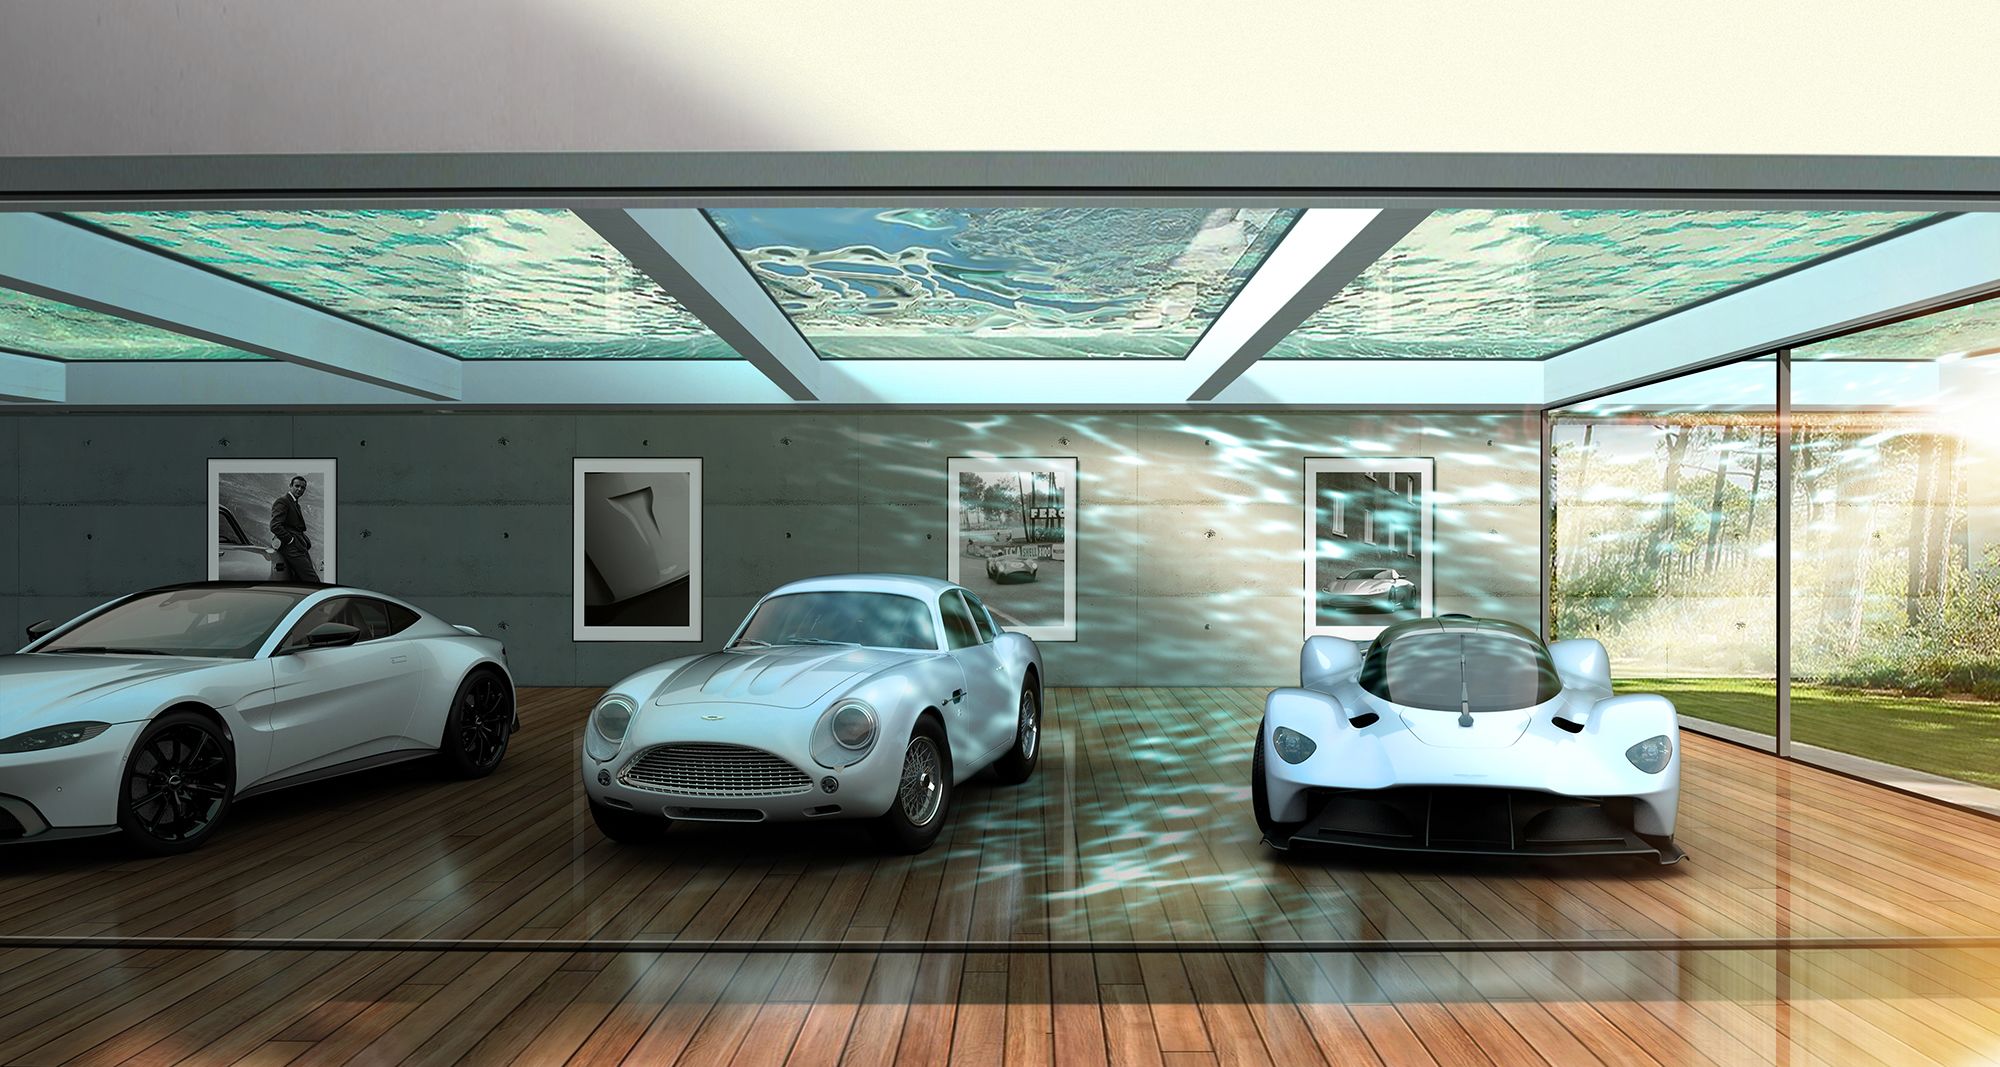 5 Amazing Garages That Showcase Your Cars Like Works of Art – Robb Report